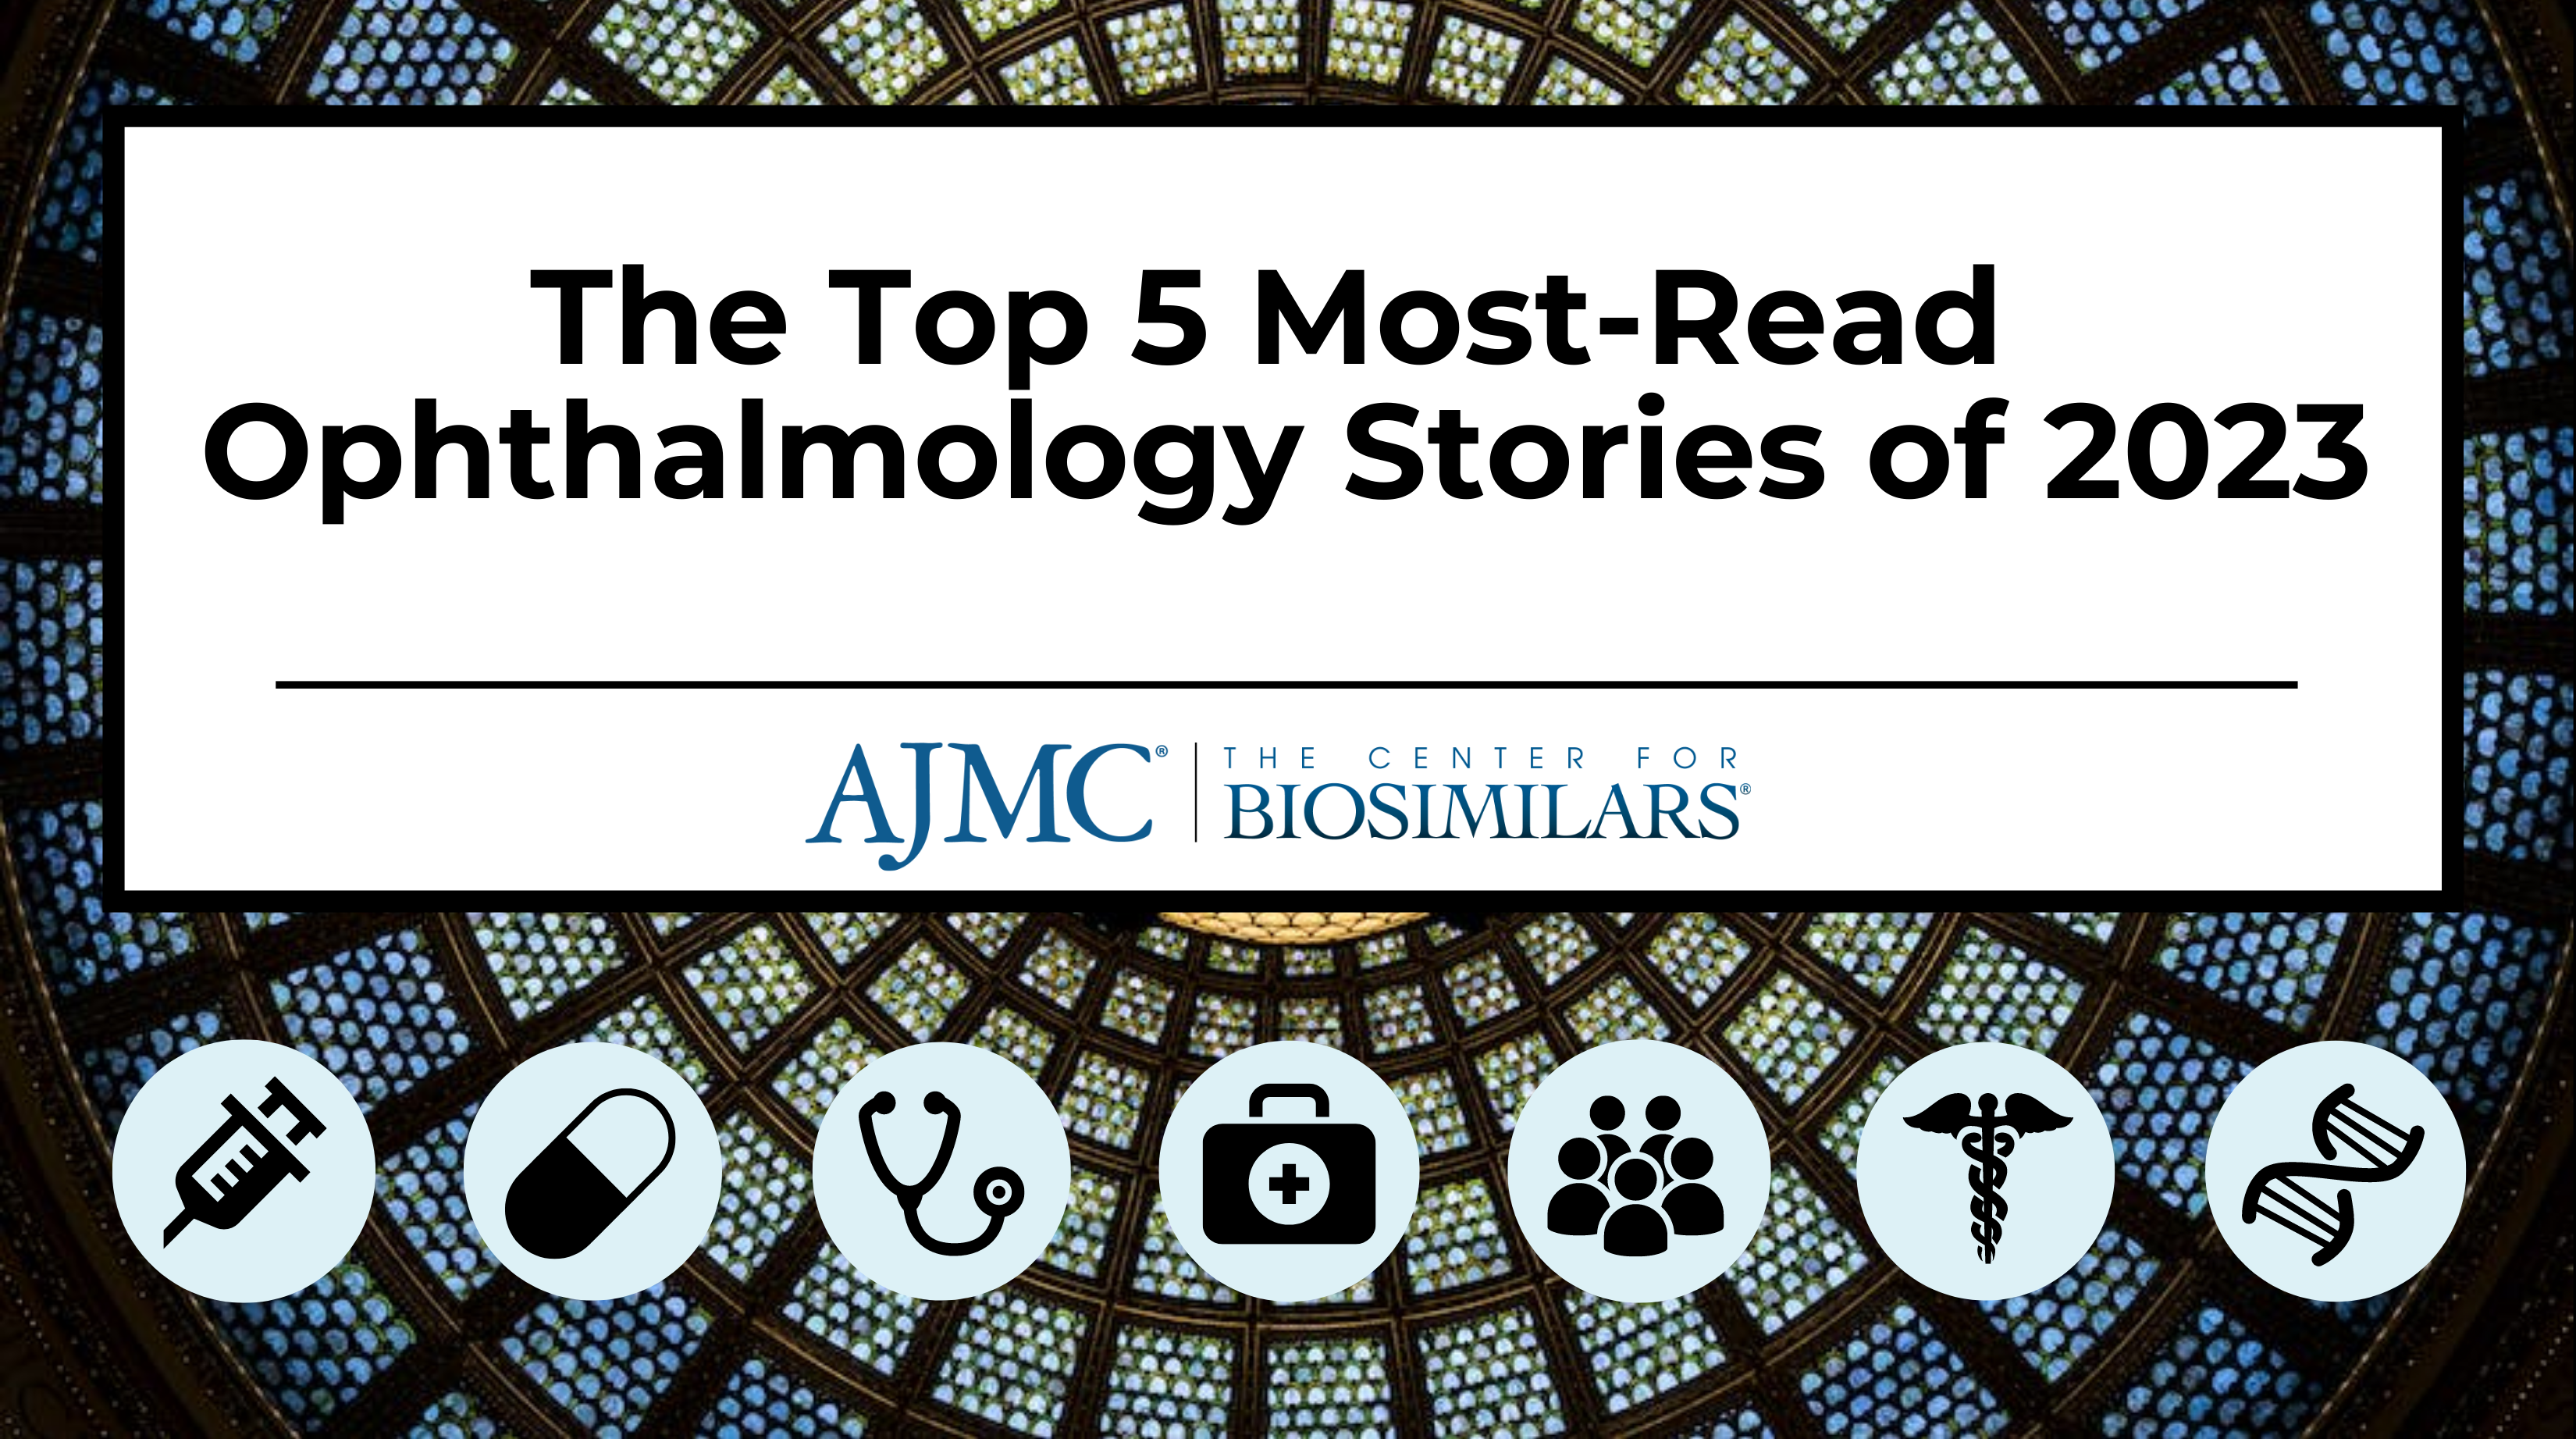 The Top 5 Most-Read Ophthalmology Stories of 2023